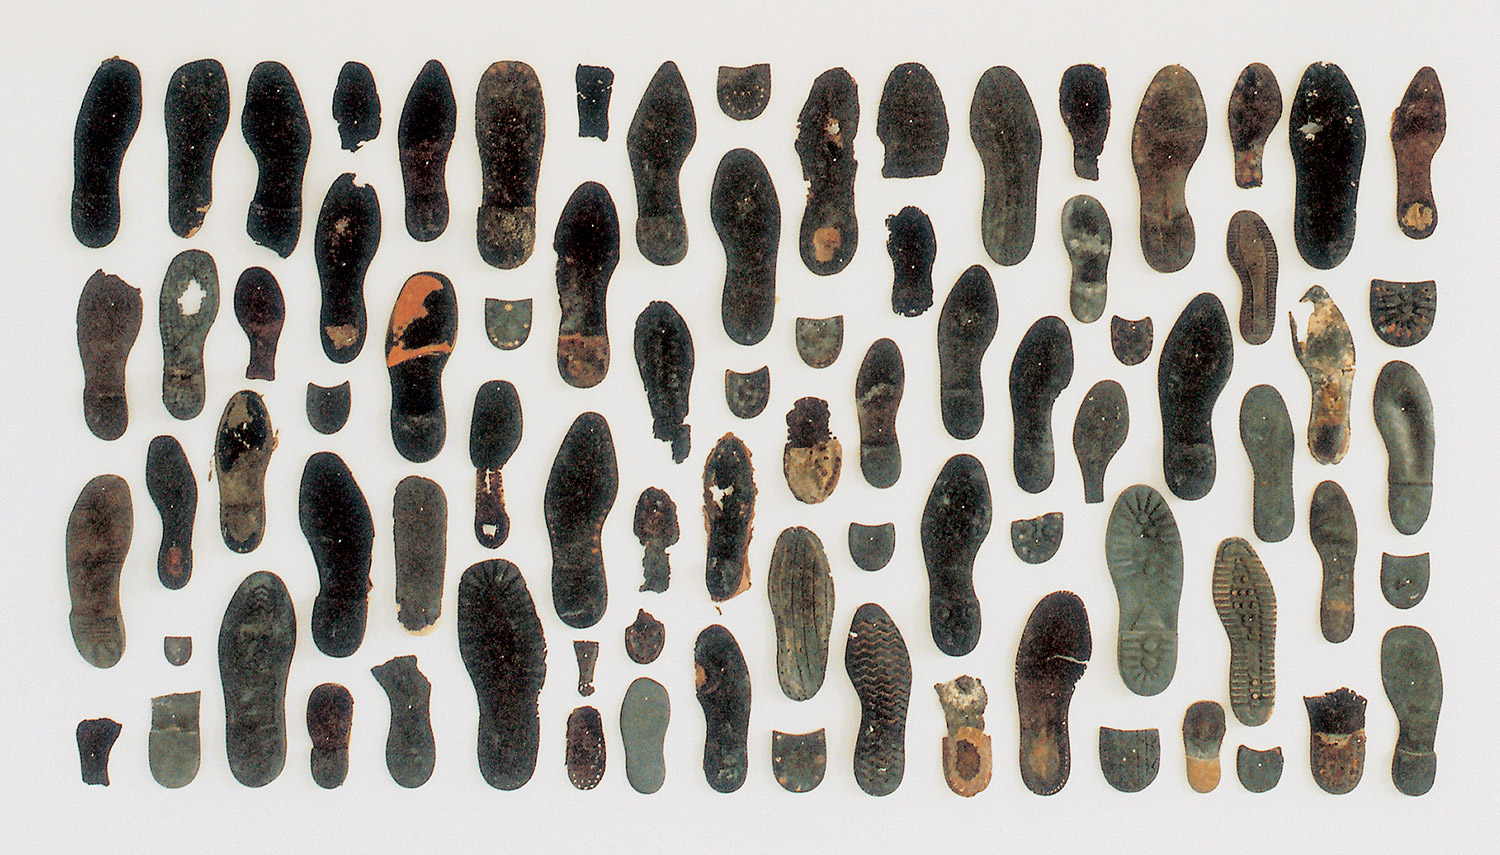 SOULS | 2,20 m x 1,10 m | shoe soles found at the beach in Italy and Greece | Work by Sven Rünger & Ebi de Boer | Galerie Herold / Bremen | 1999